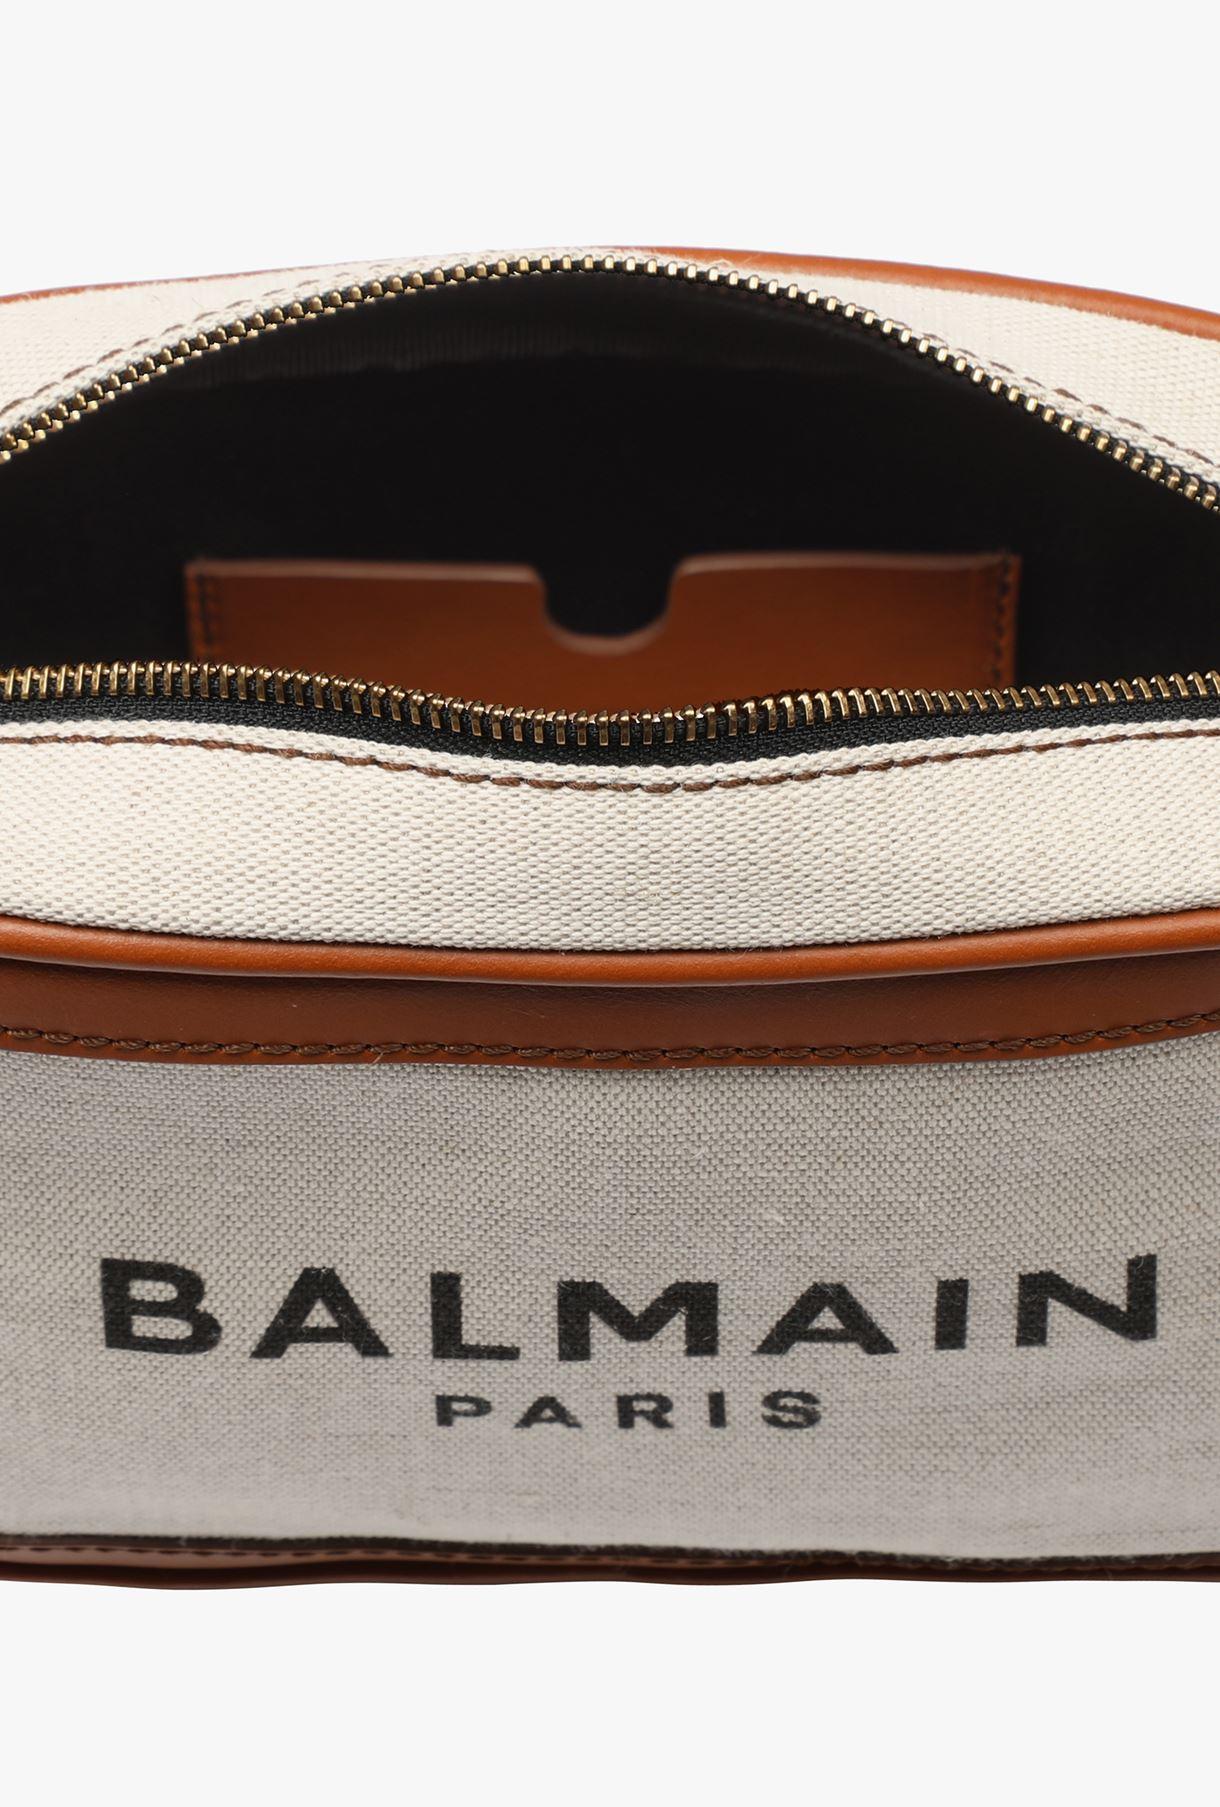 Balmain Ecru Canvas B-army 20 Belt Bag With Brown Leather Panels for ...